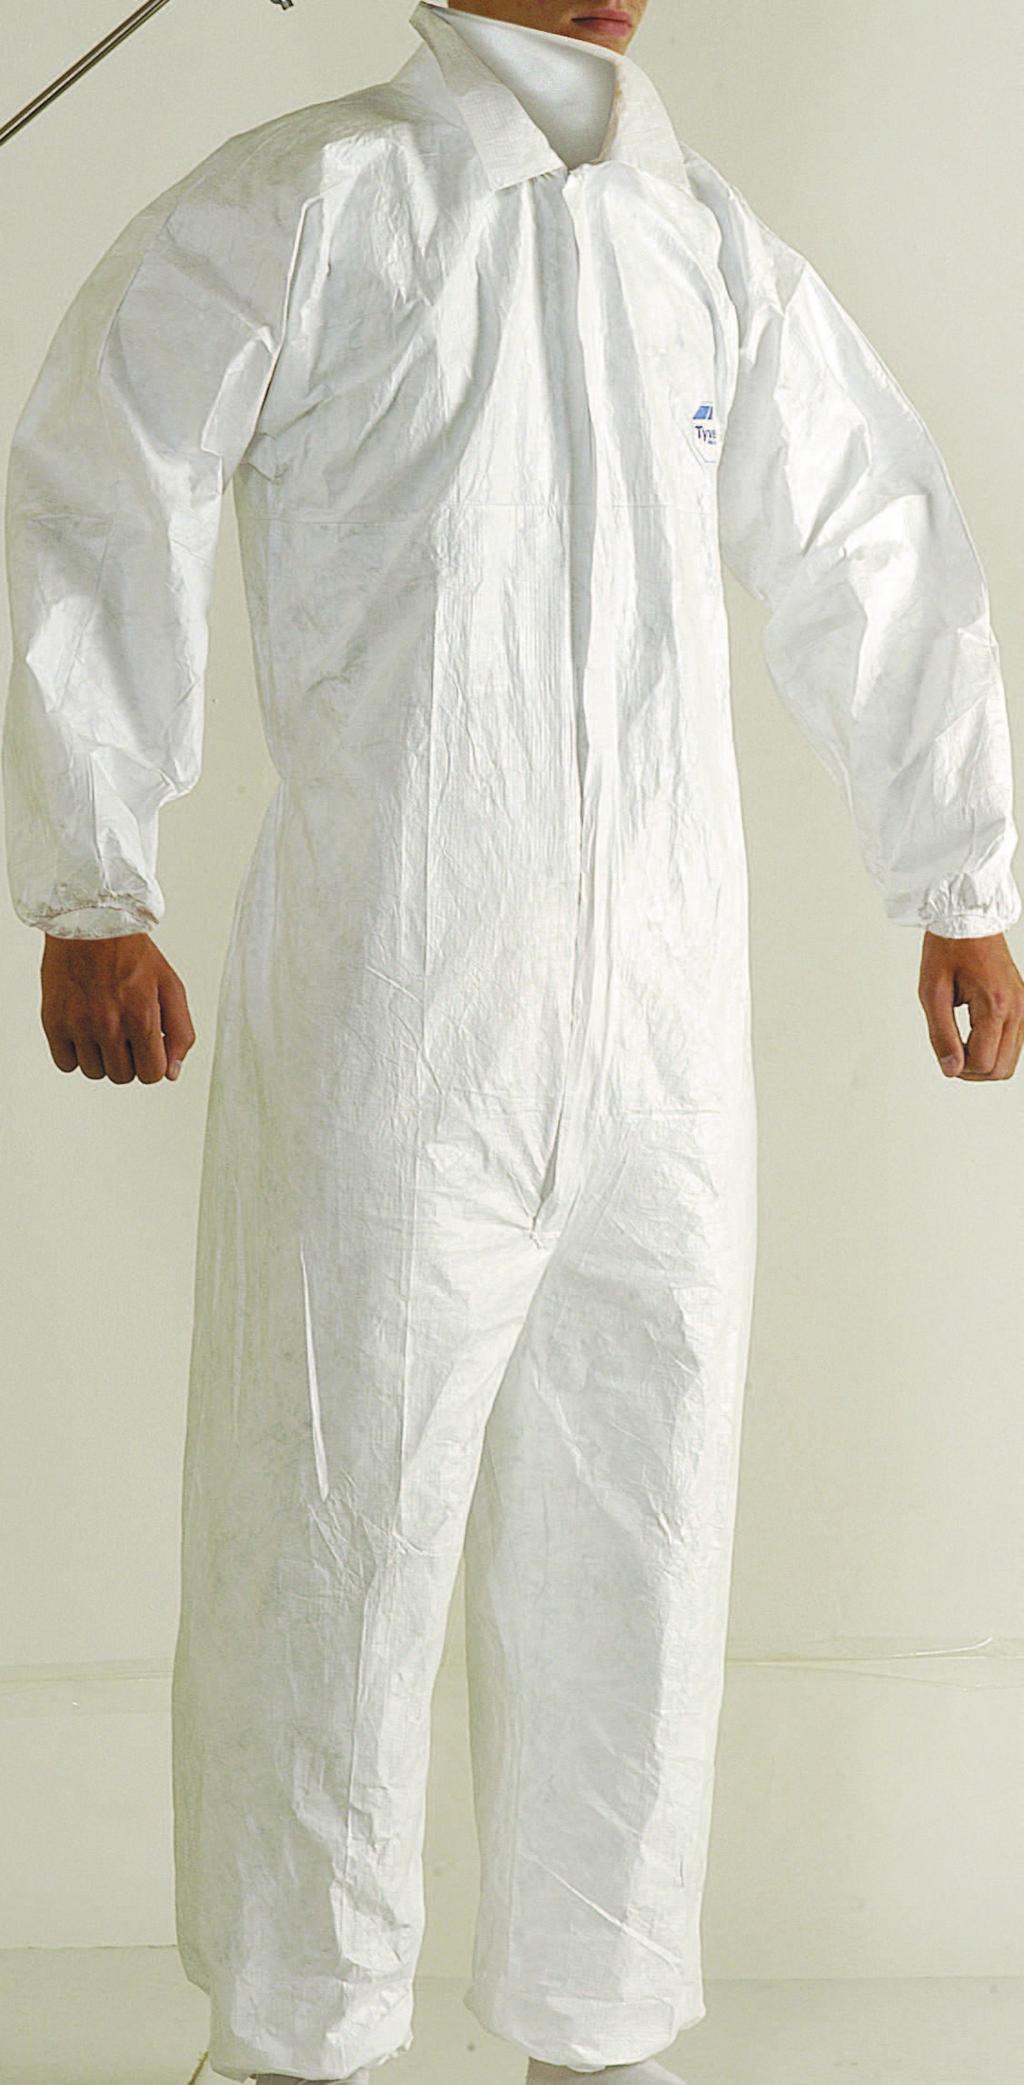 velikosti M, L, XL, XXL Protective coverall Tyvek Practic (DuPont) with collar, unwoven Tyvek polyethylene, microperforated, protection against dirt, grey, sizes M, L, XL, XXL 34638